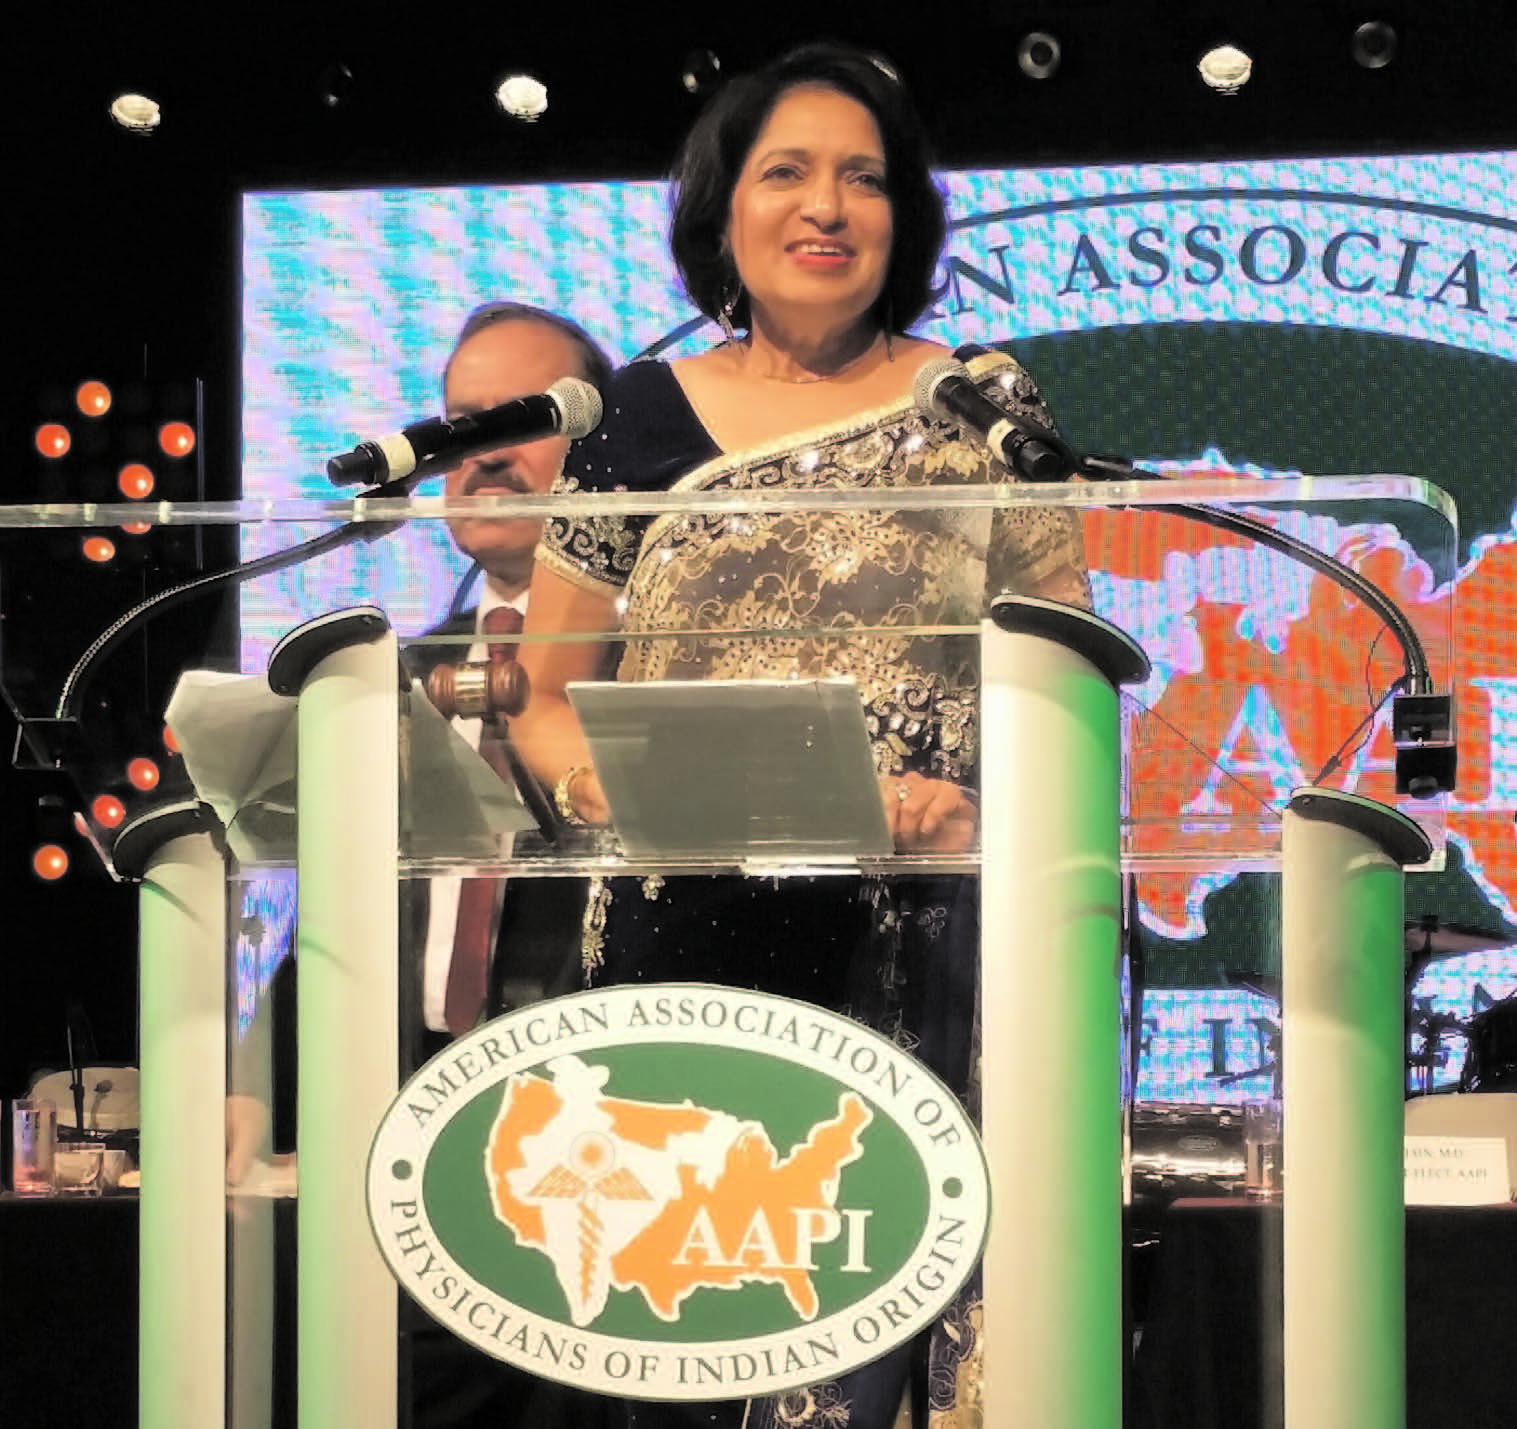 "Now, it's time for us to mainstream AAPI. From being an ethnic organization, we need to be a mainstream organization that is committed to the cause of ethnic Indian American physicians and many noble causes that we are committed for:\", said Dr. Seema Jain at the AAPI convention.